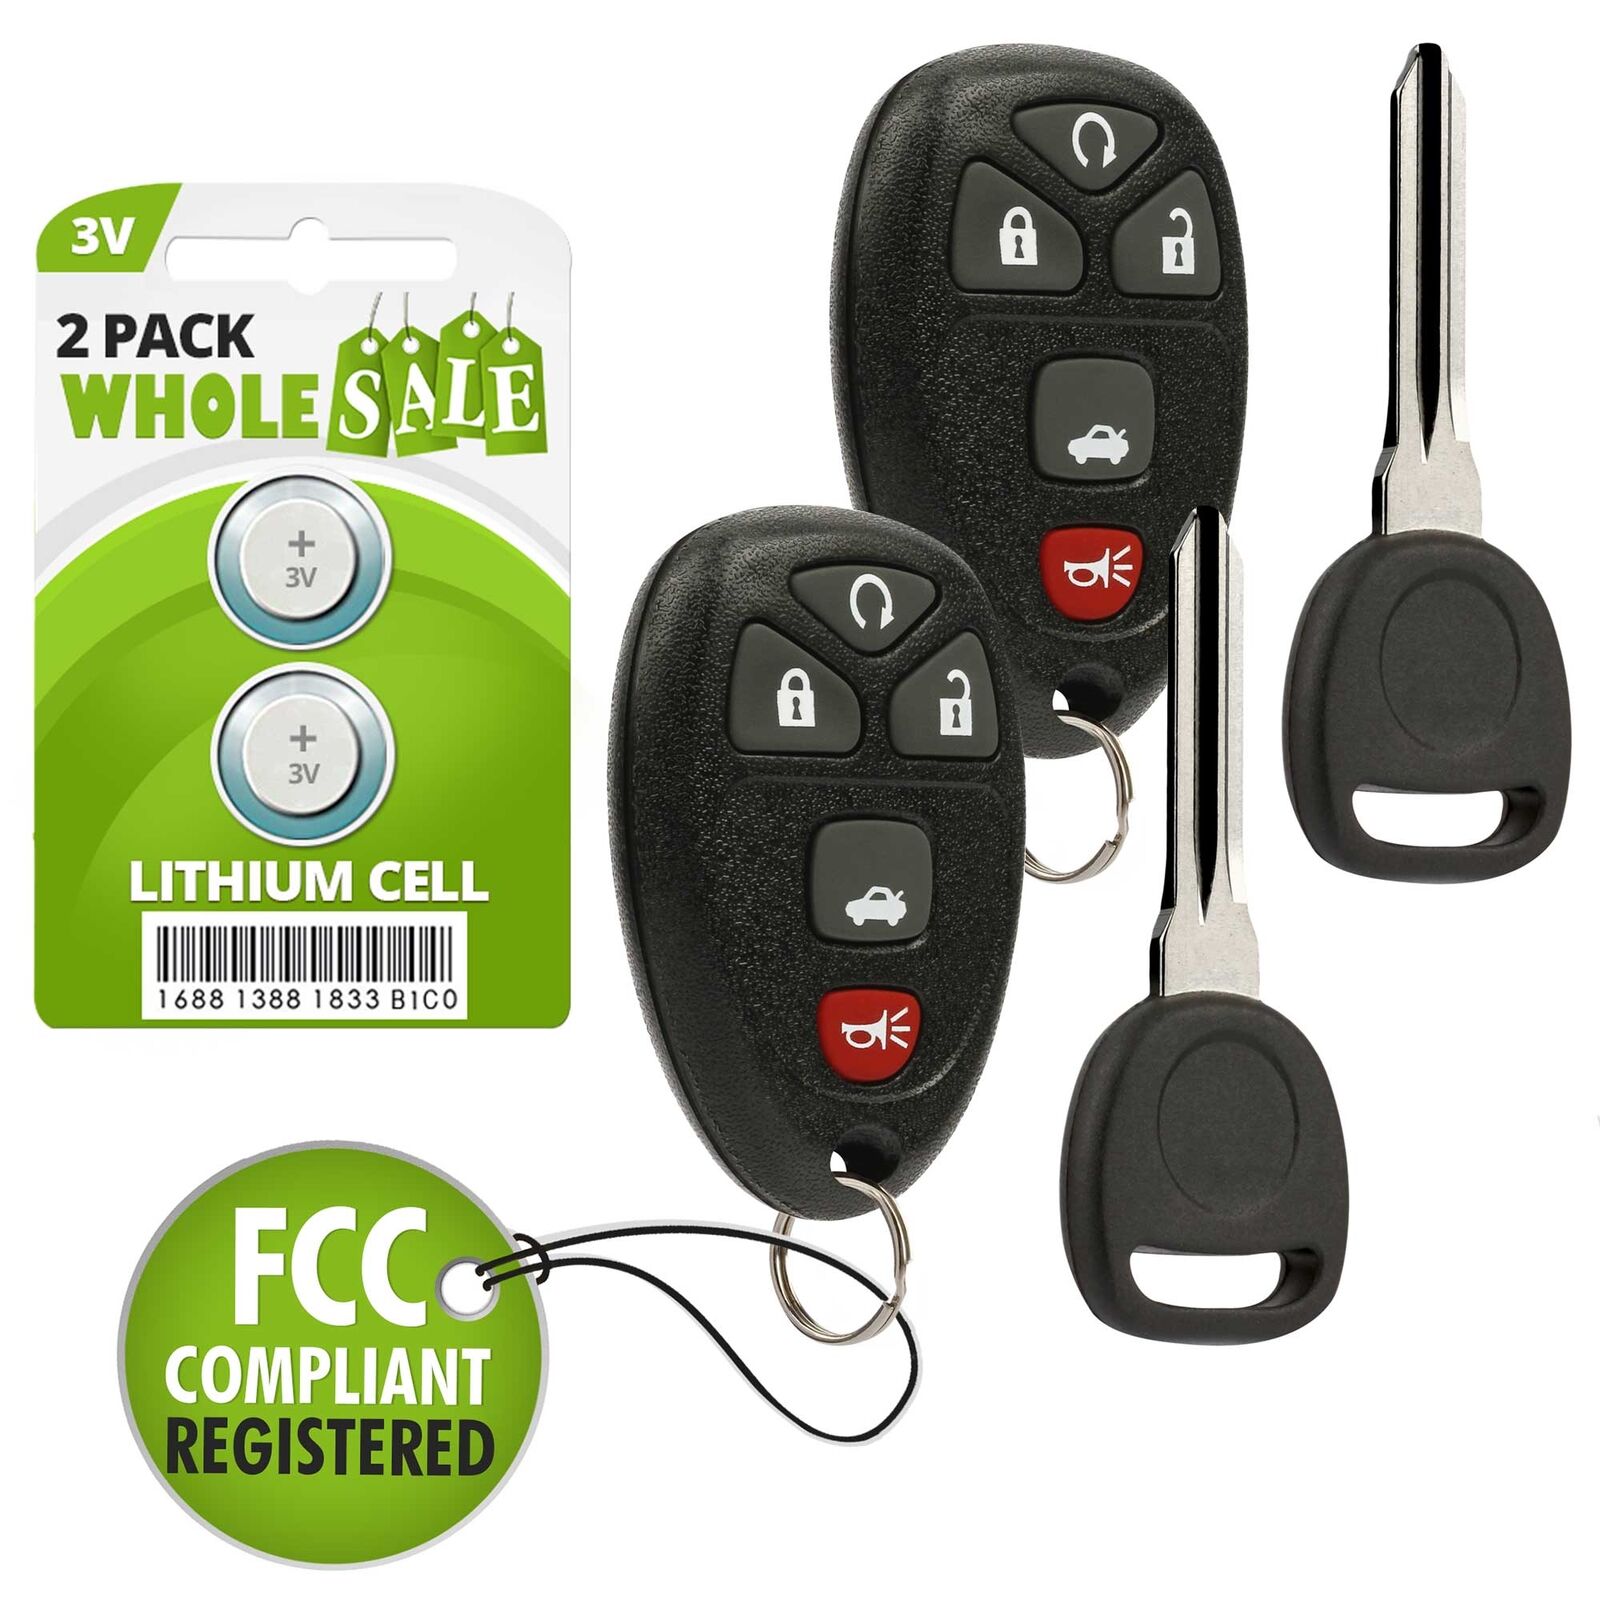 2 Replacement For 06 07 08 09 10 11 12 13 Chevrolet Impala Key + Fob Remote